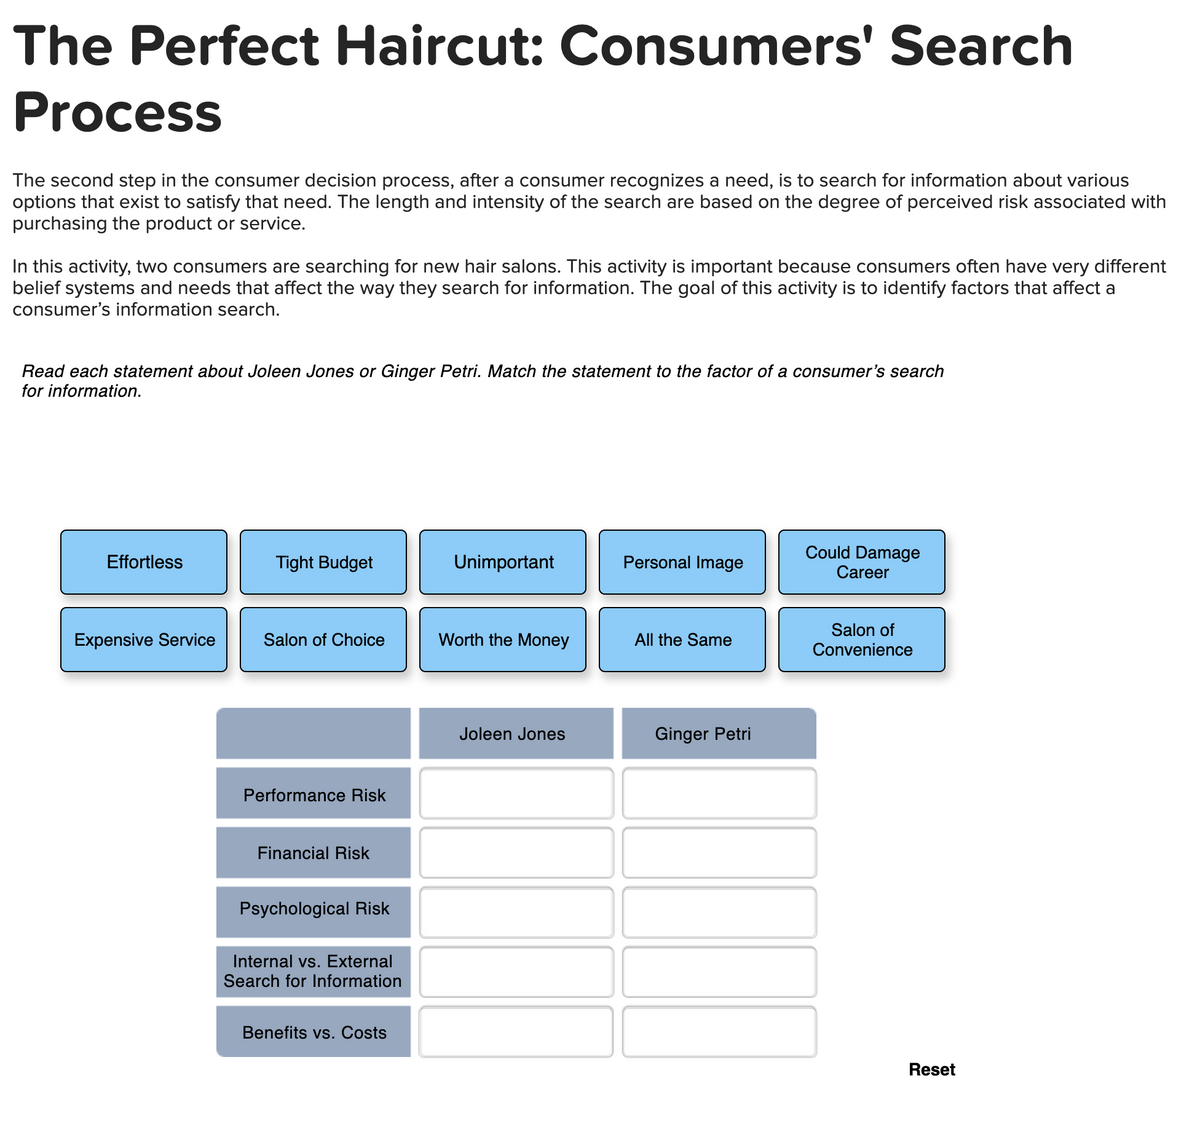 The Perfect Haircut: Consumers' Search
Process
The second step in the consumer decision process, after a consumer recognizes a need, is to search for information about various
options that exist to satisfy that need. The length and intensity of the search are based on the degree of perceived risk associated with
purchasing the product or service.
In this activity, two consumers are searching for new hair salons. This activity is important because consumers often have very different
belief systems and needs that affect the way they search for information. The goal of this activity is to identify factors that affect a
consumer's information search.
Read each statement about Joleen Jones or Ginger Petri. Match the statement to the factor of a consumer's search
for information.
Effortless
Expensive Service
Tight Budget
Salon of Choice
Performance Risk
Financial Risk
Psychological Risk
Internal vs. External
Search for Information
Benefits vs. Costs
Unimportant
Worth the Money
Joleen Jones
Personal Image
All the Same
Ginger Petri
Could Damage
Career
Salon of
Convenience
Reset